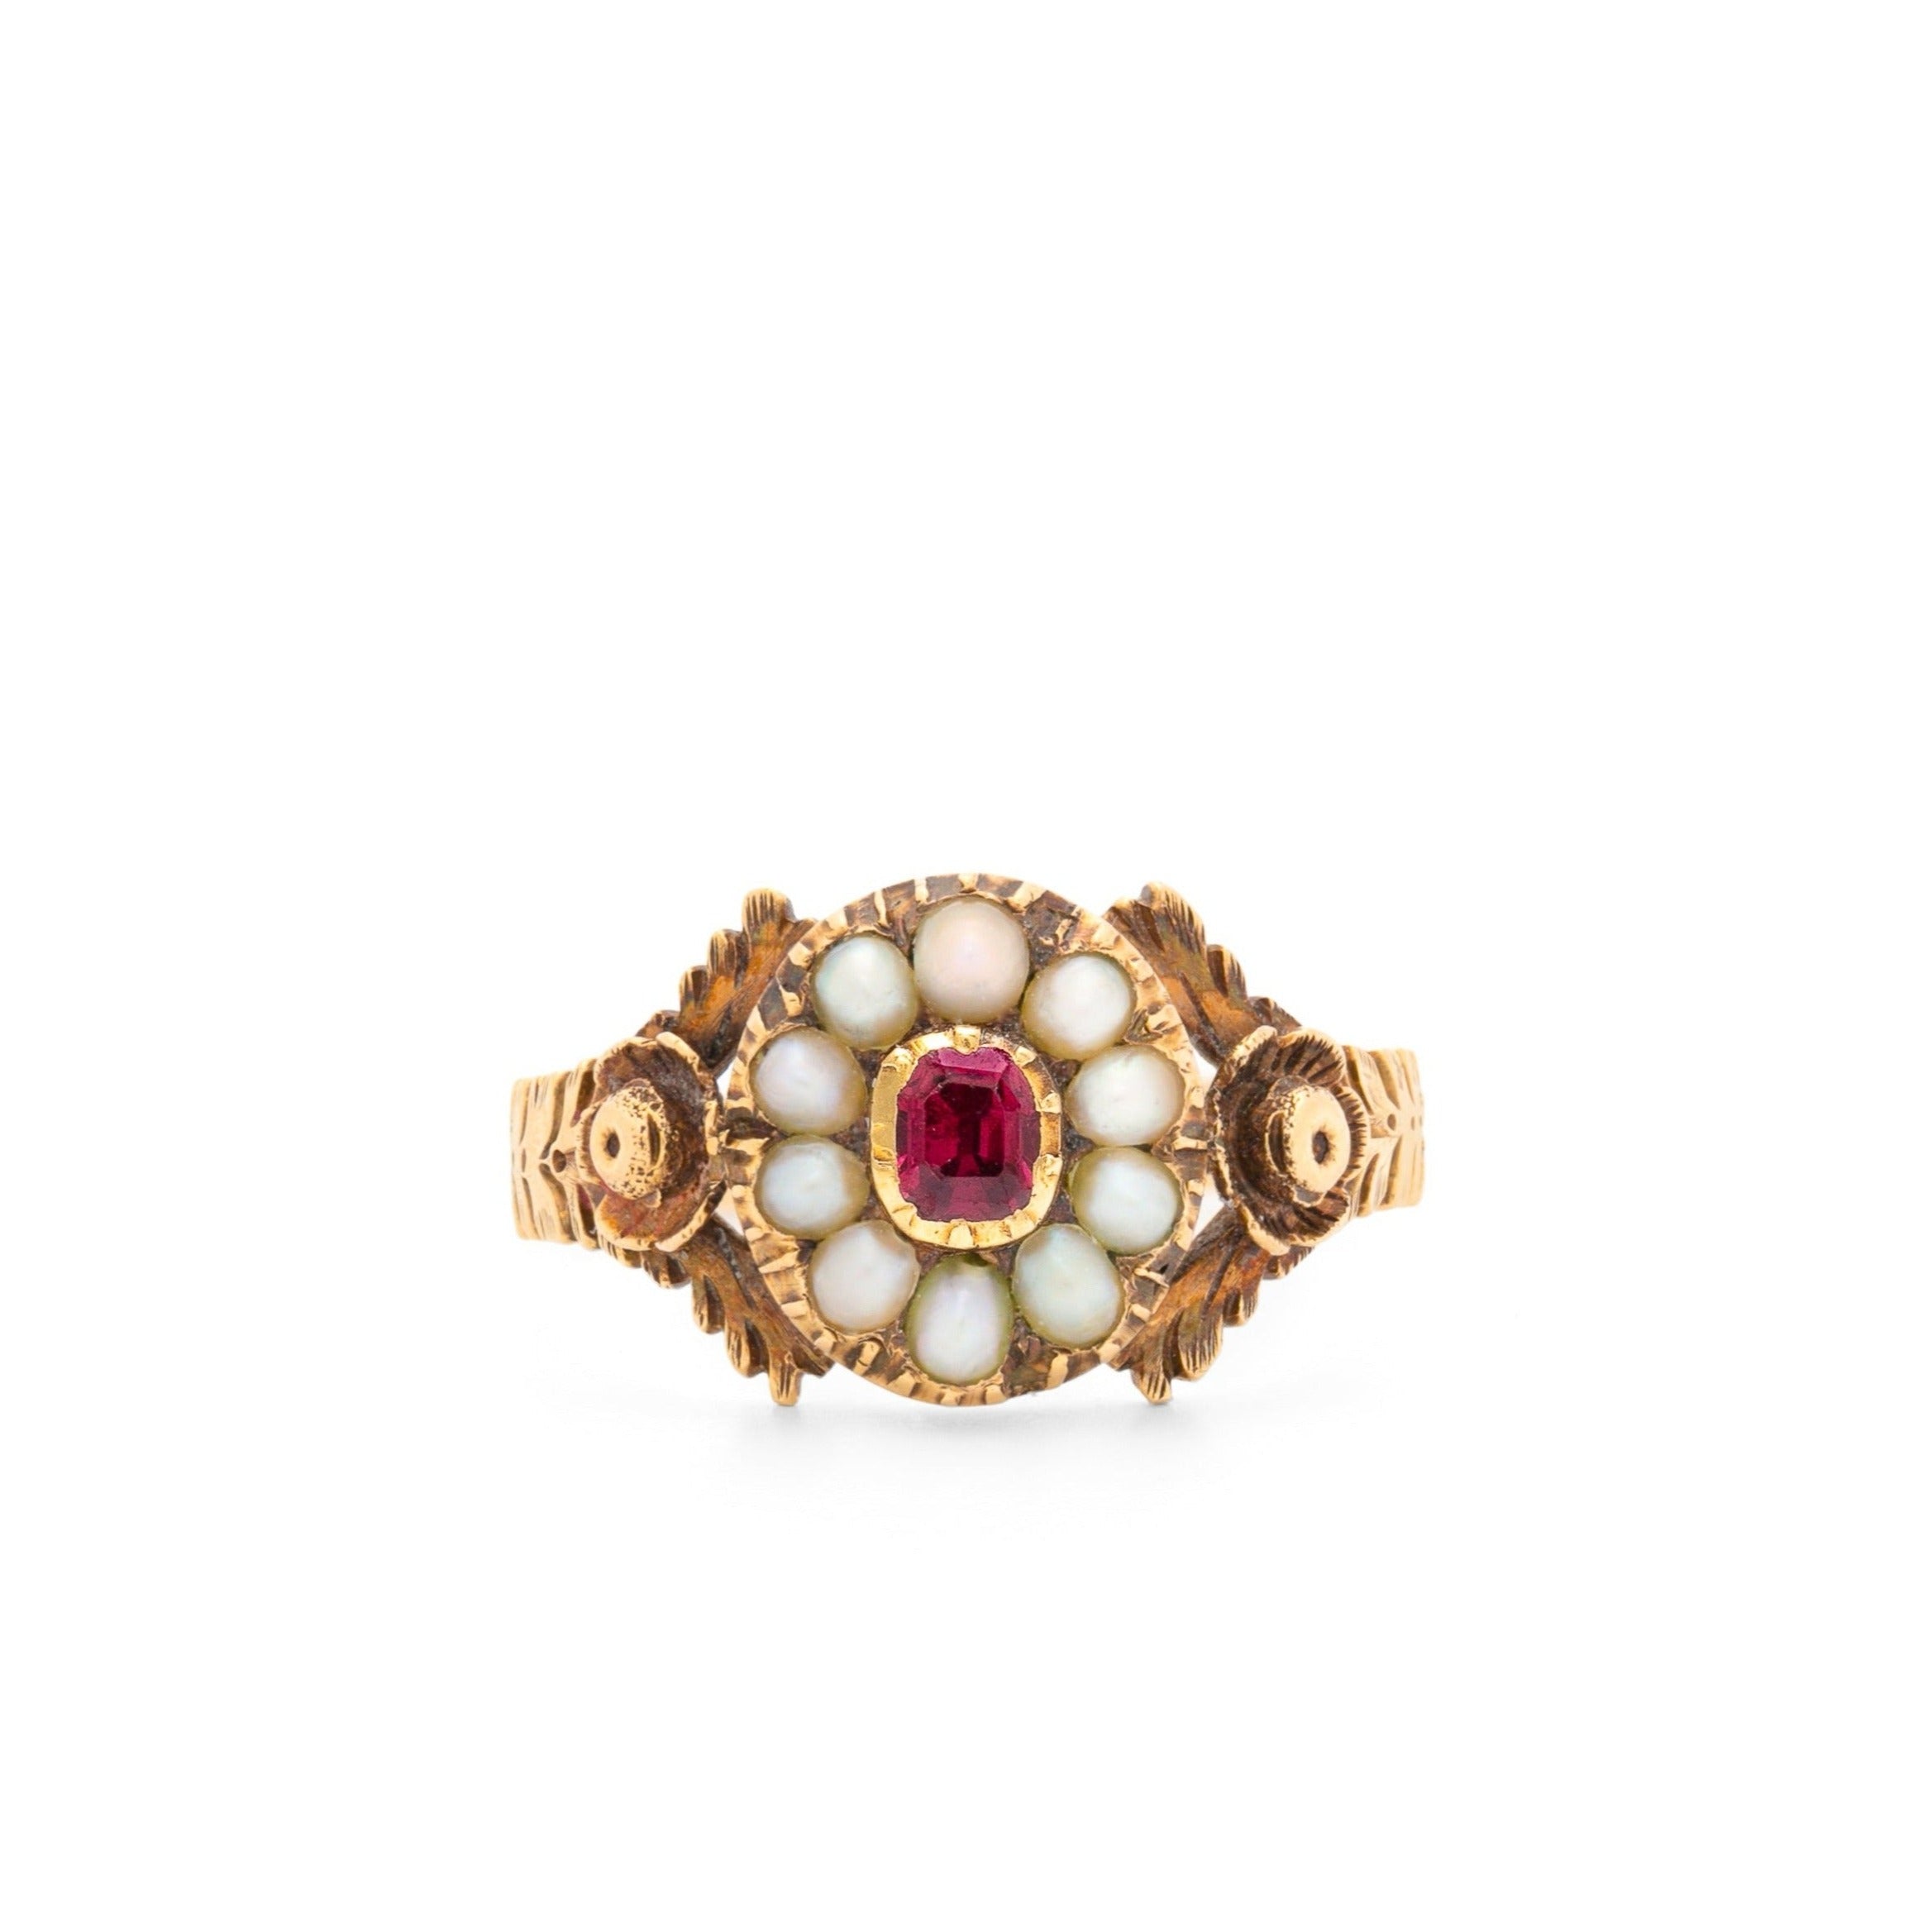 Vintage Pearl Flower Ring in 14k Yellow Gold (r2573) - Summit Jewelers |  7821 Big Bend Blvd. | Webster Groves, MO | 63119 | 314.962.1400